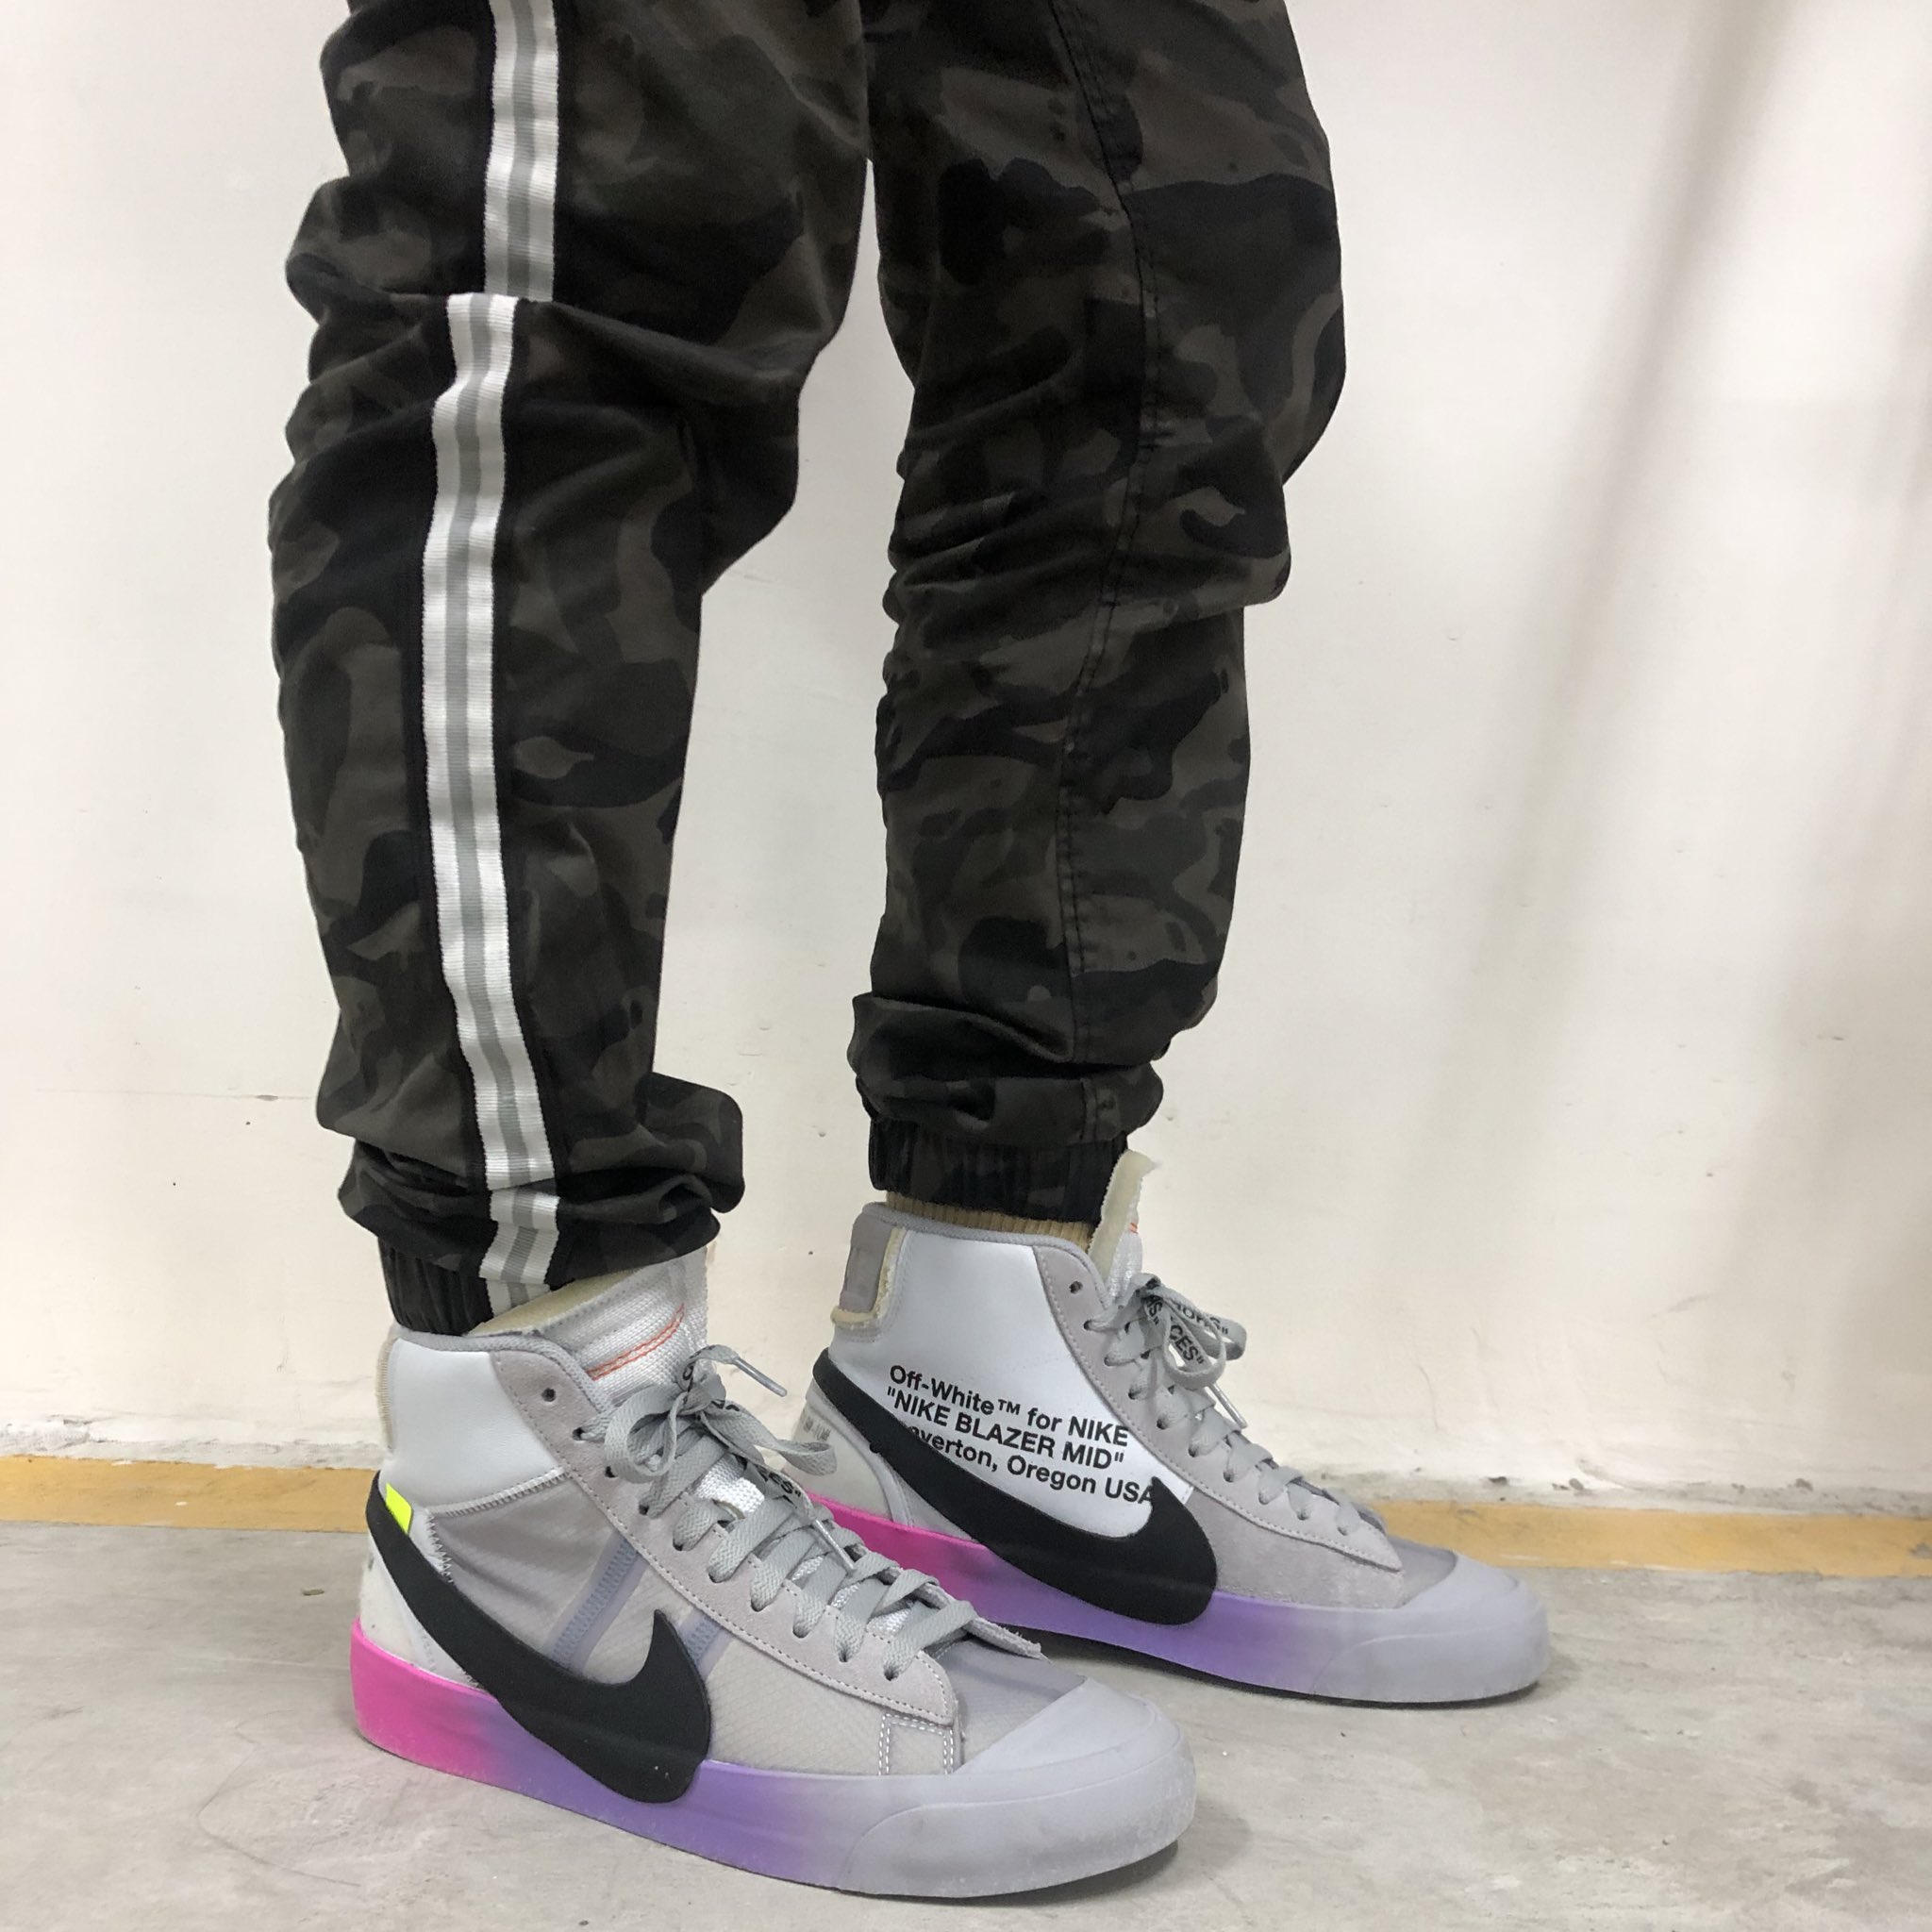 Hairil Potter on "By far the best pick up for my collection. Nike Blazer Mid x Off White Williams” hands down Sneaker of the year imo. Fell in love